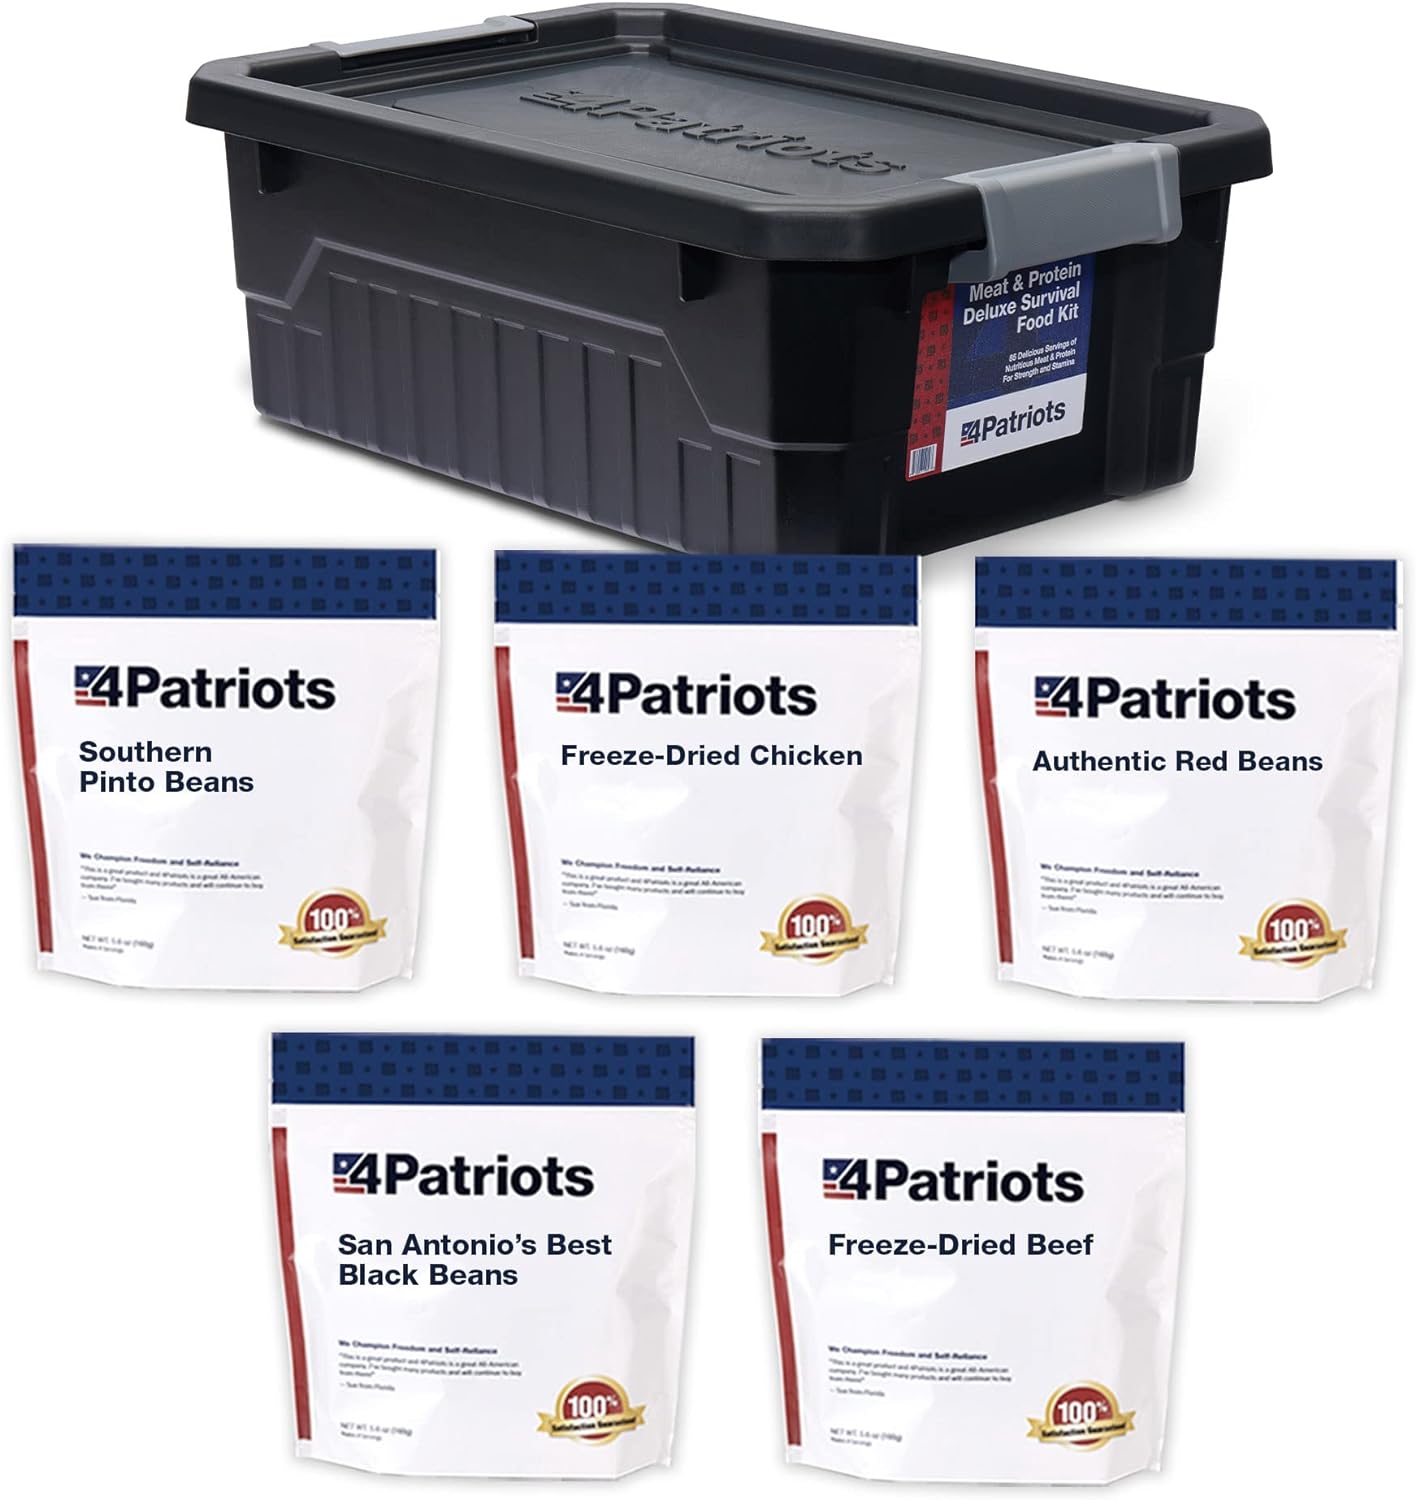 4Patriots Meat & Protein Survival Kit Review